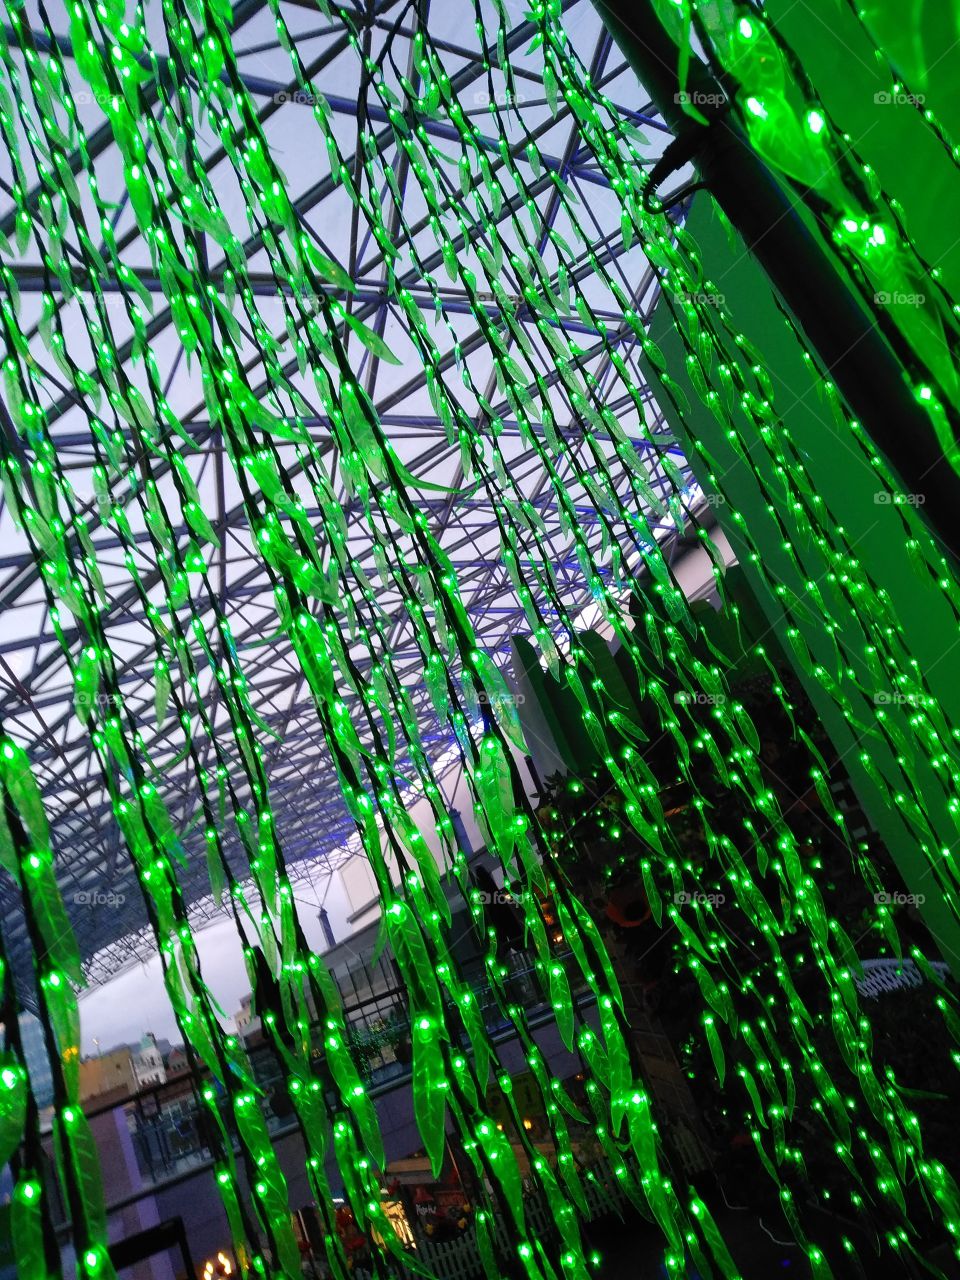 Bright green, leafy fairy lights dangling g down from the roof of Victoria Square, Belfast